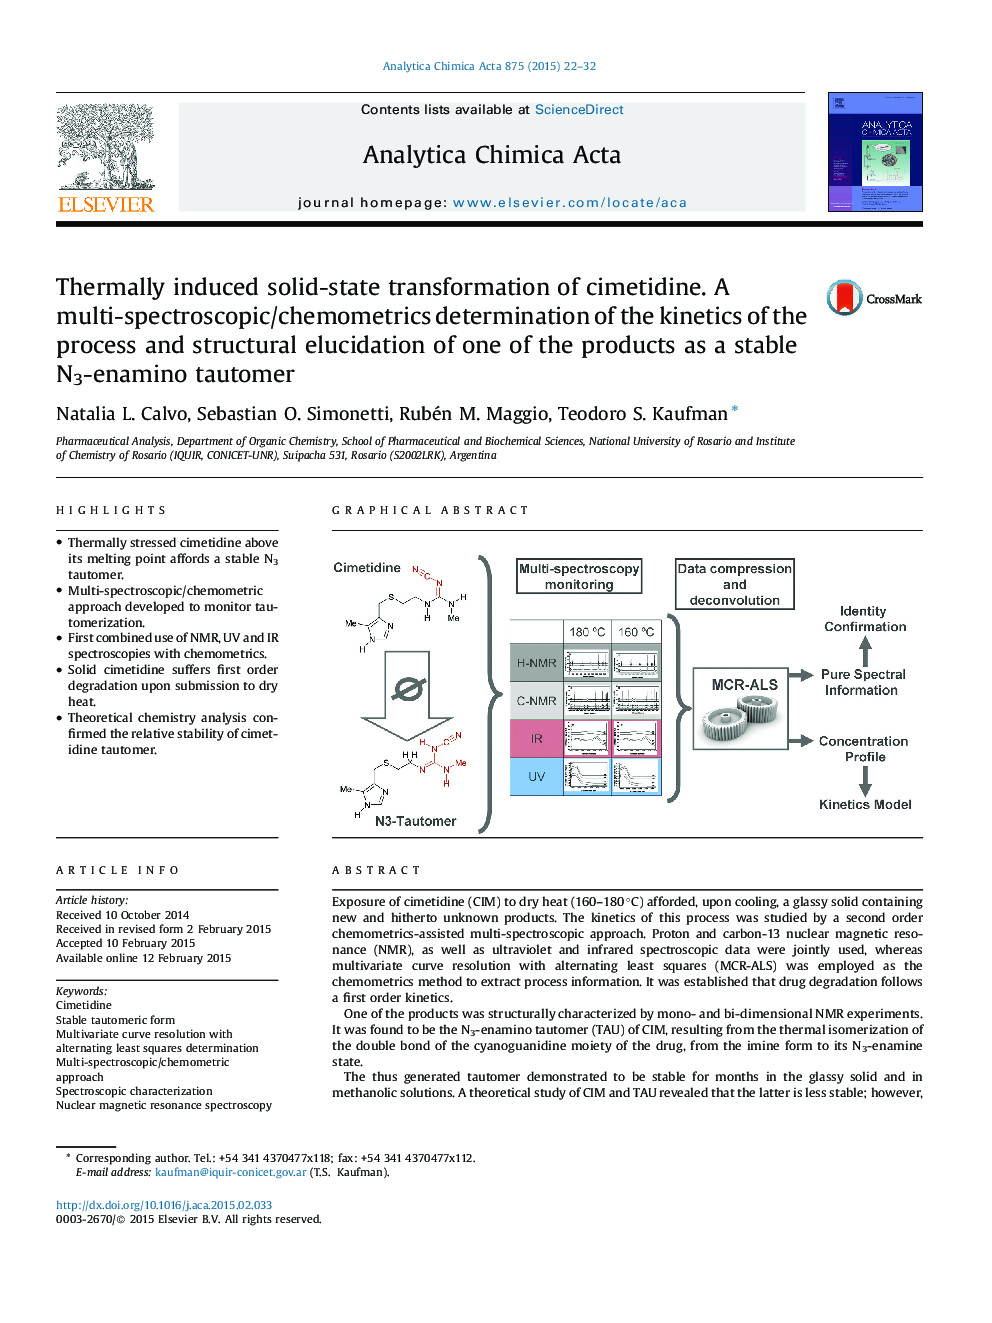 Thermally induced solid-state transformation of cimetidine. A multi-spectroscopic/chemometrics determination of the kinetics of the process and structural elucidation of one of the products as a stable N3-enamino tautomer